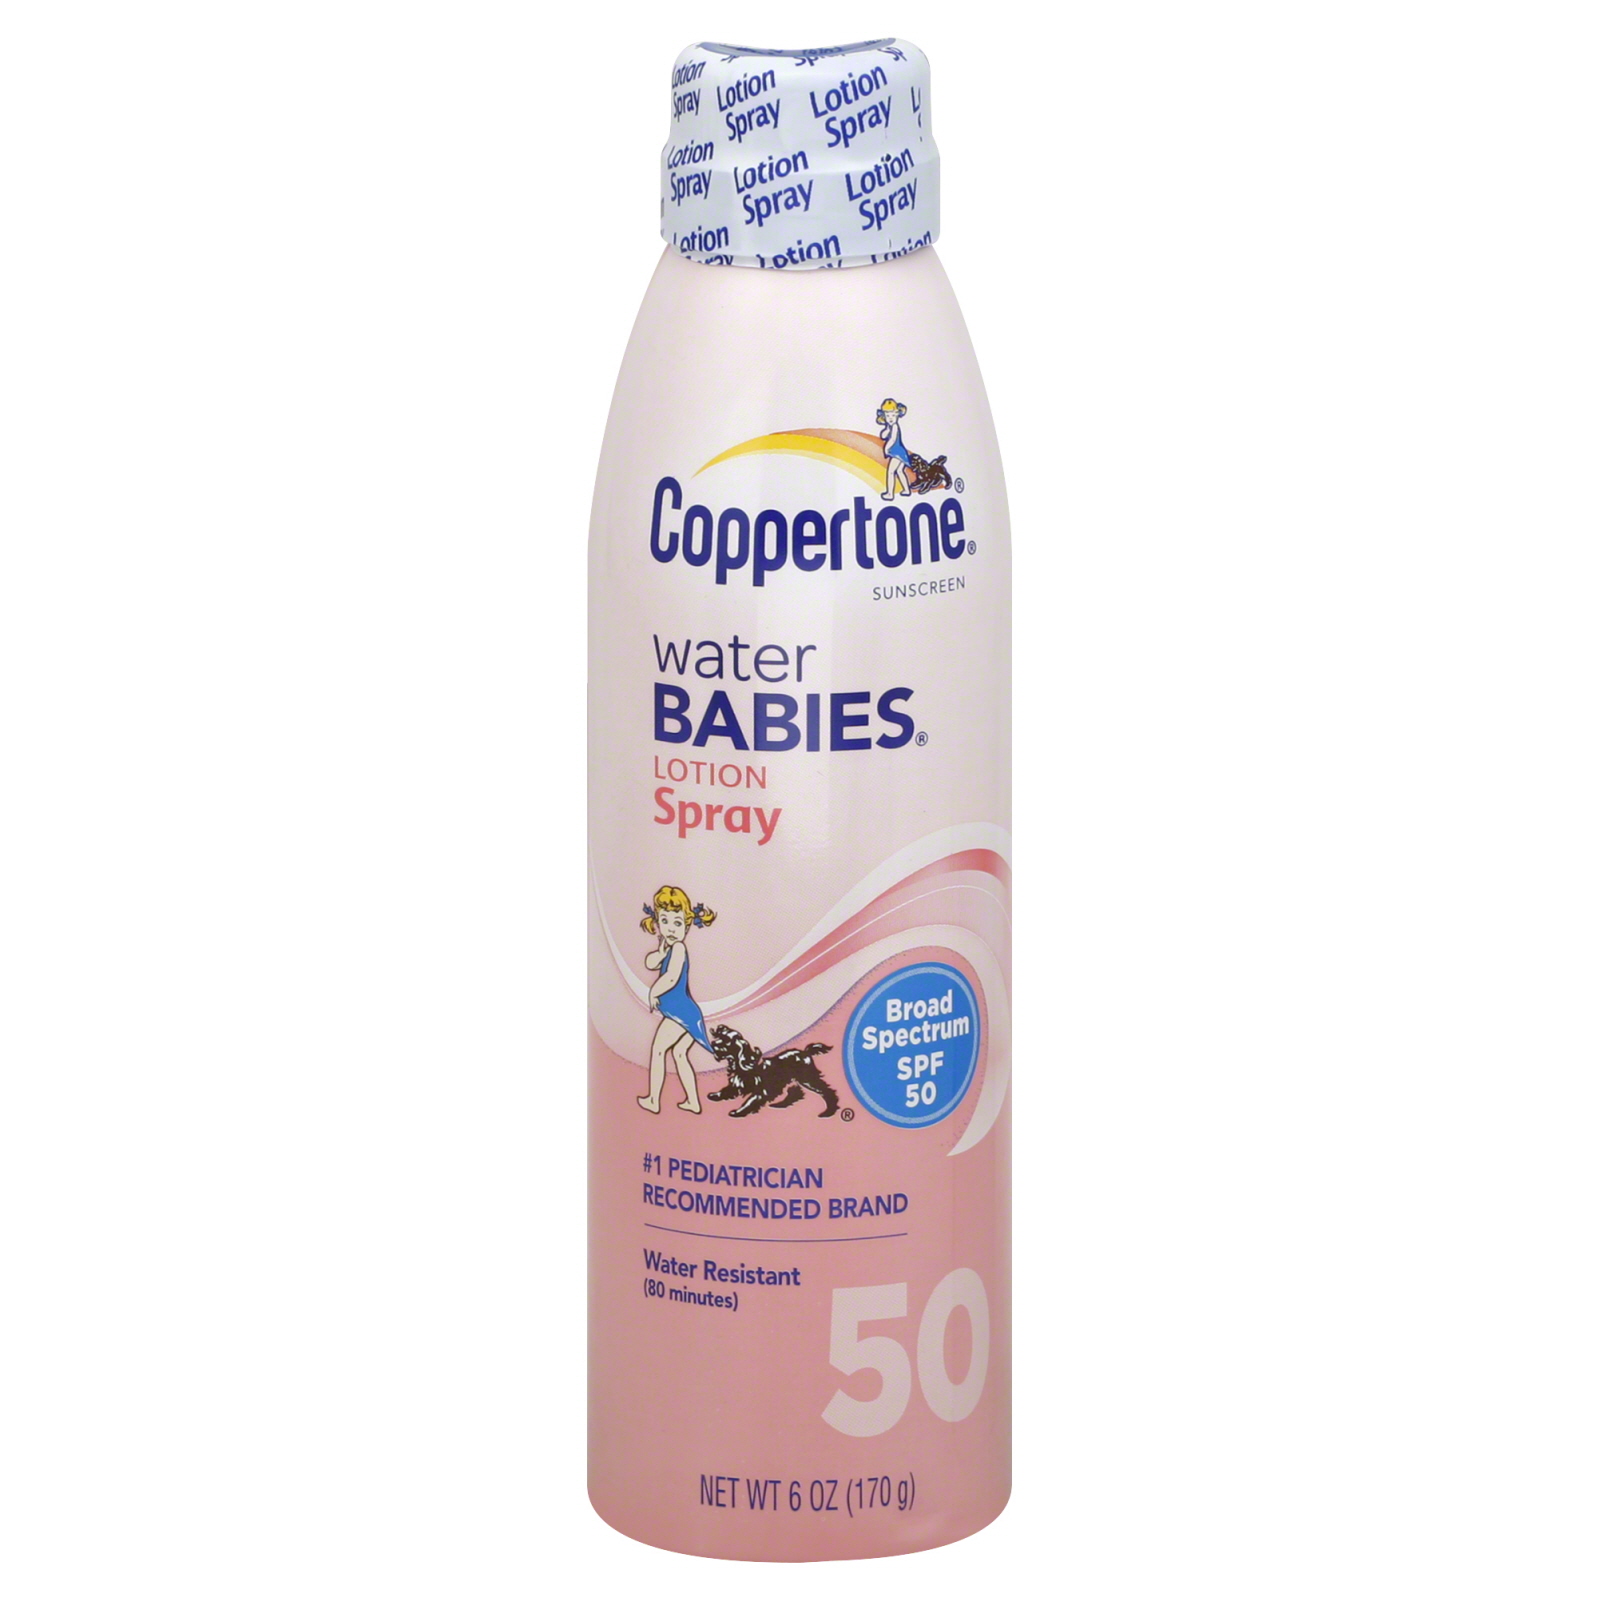 Coppertone Water Babies Sunscreen, Quick Cover Lotion Spray, SPF 50, 6 oz (170 g)